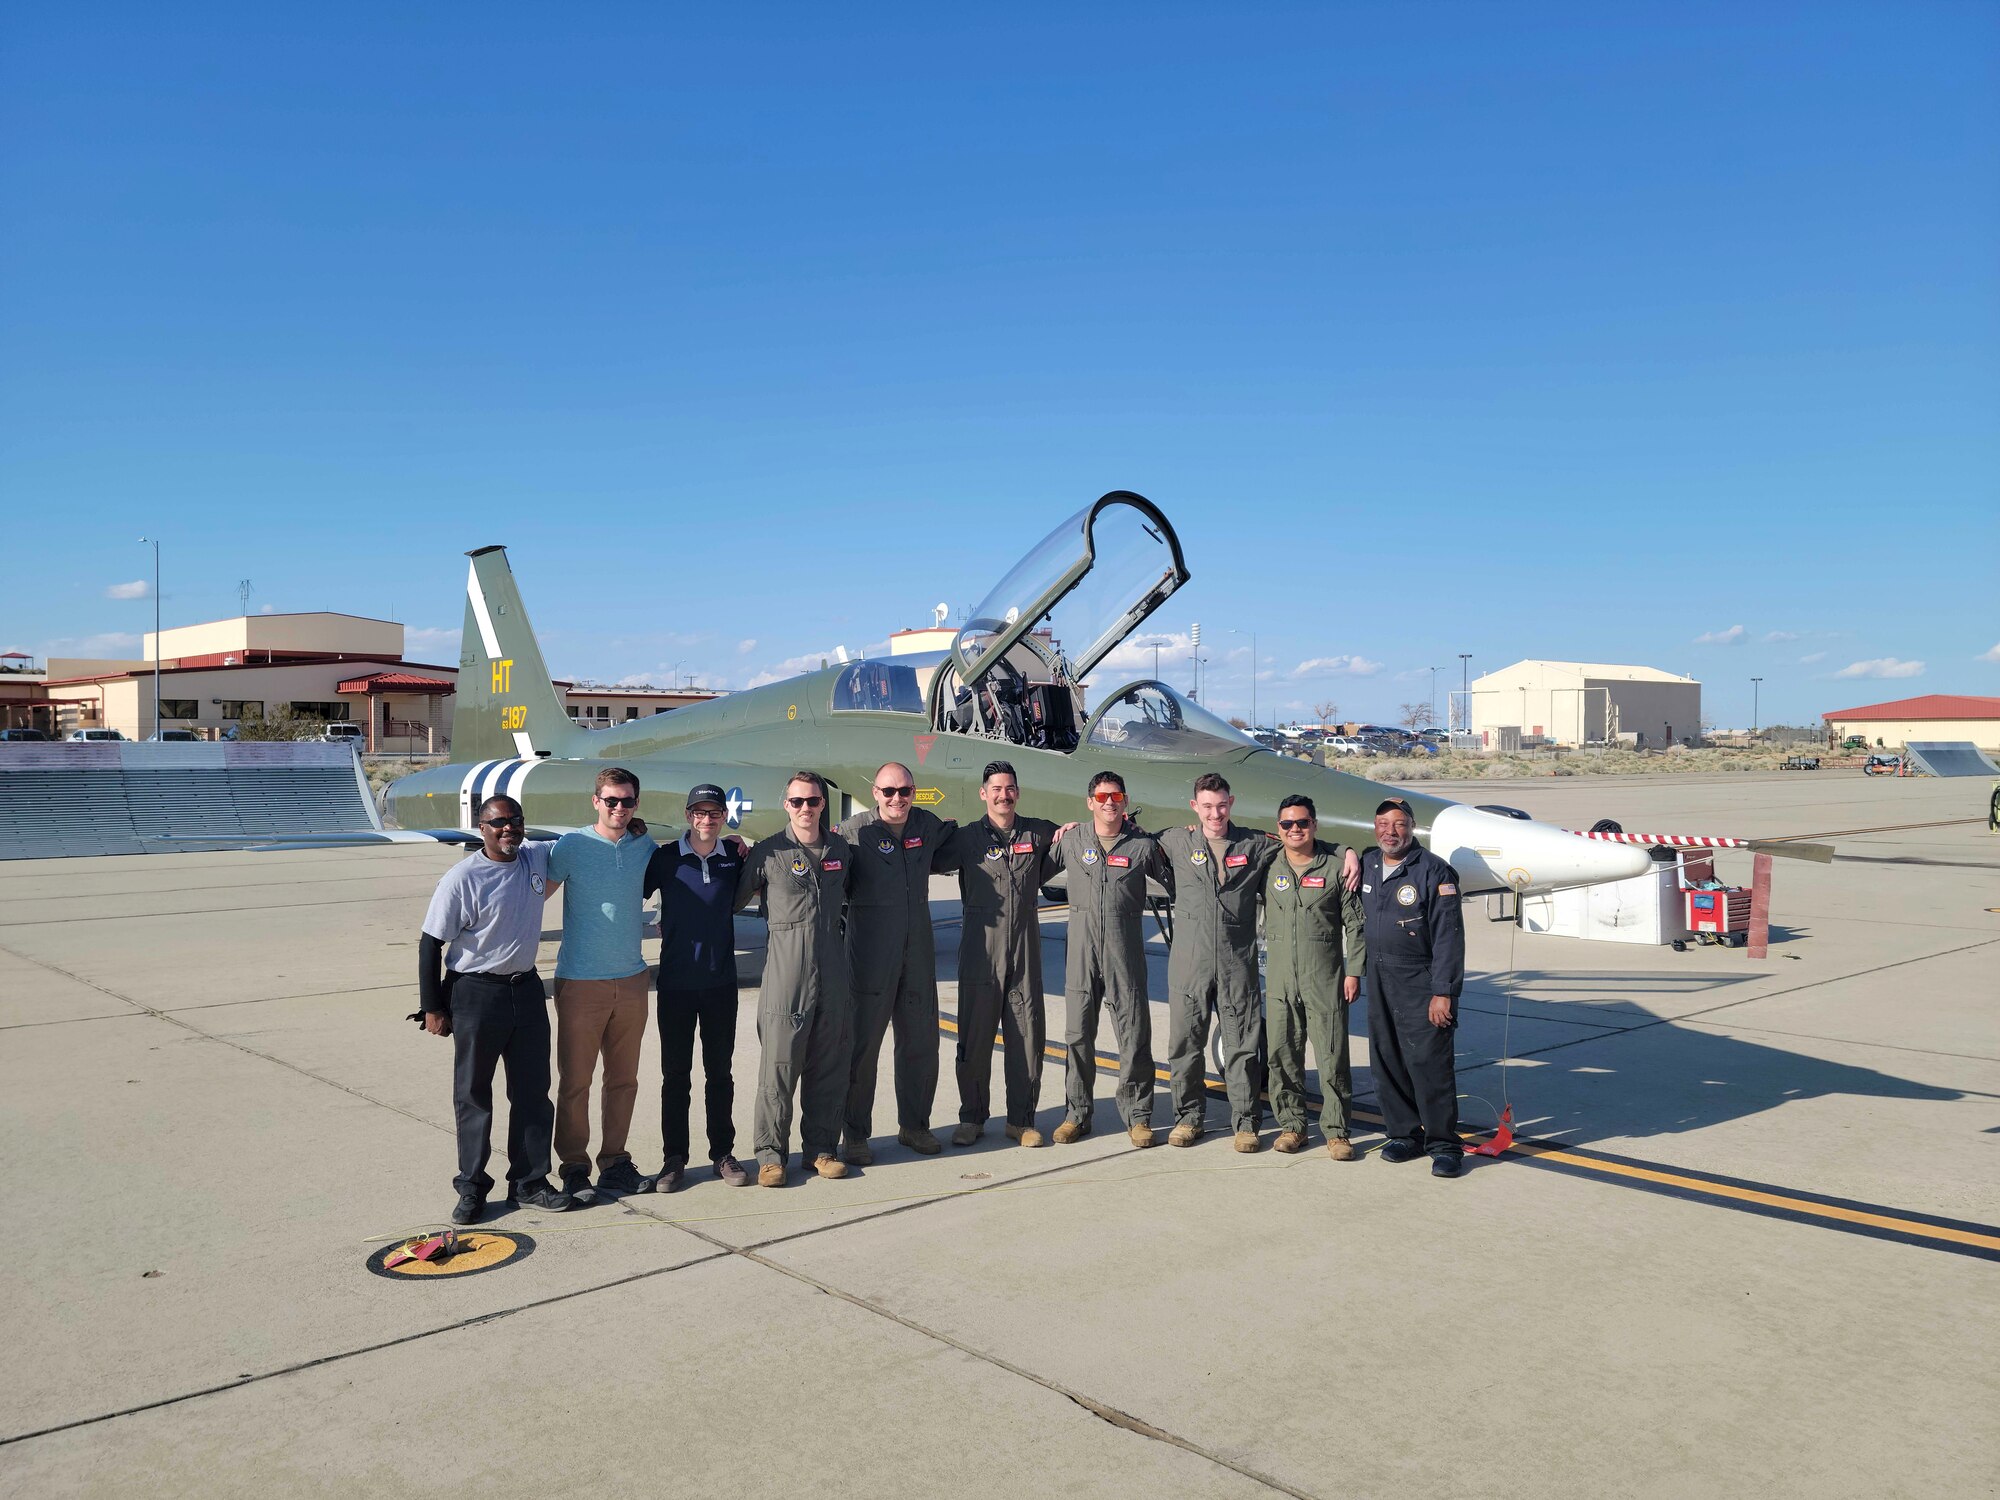 The "Have 5tarboy" team poses for a photo in front of a T-38C from Holloman. (Members: Steve "Nike" O'Briant, Project Pilot, Capt. Nathan "Loball" Raquet, Project Lead/Engineer, Joshua Morales, CEO of StarNav, Capt. Ajericho "Saint" Malia, Project Engineer, Squadron Leader Stephen "Tavo" Tavener Project Pilot (UK), Capt. Casey "Sandman" Slattery, Project Engineer, Maj. Matt "Doc" Daugherty, Project Pilot)